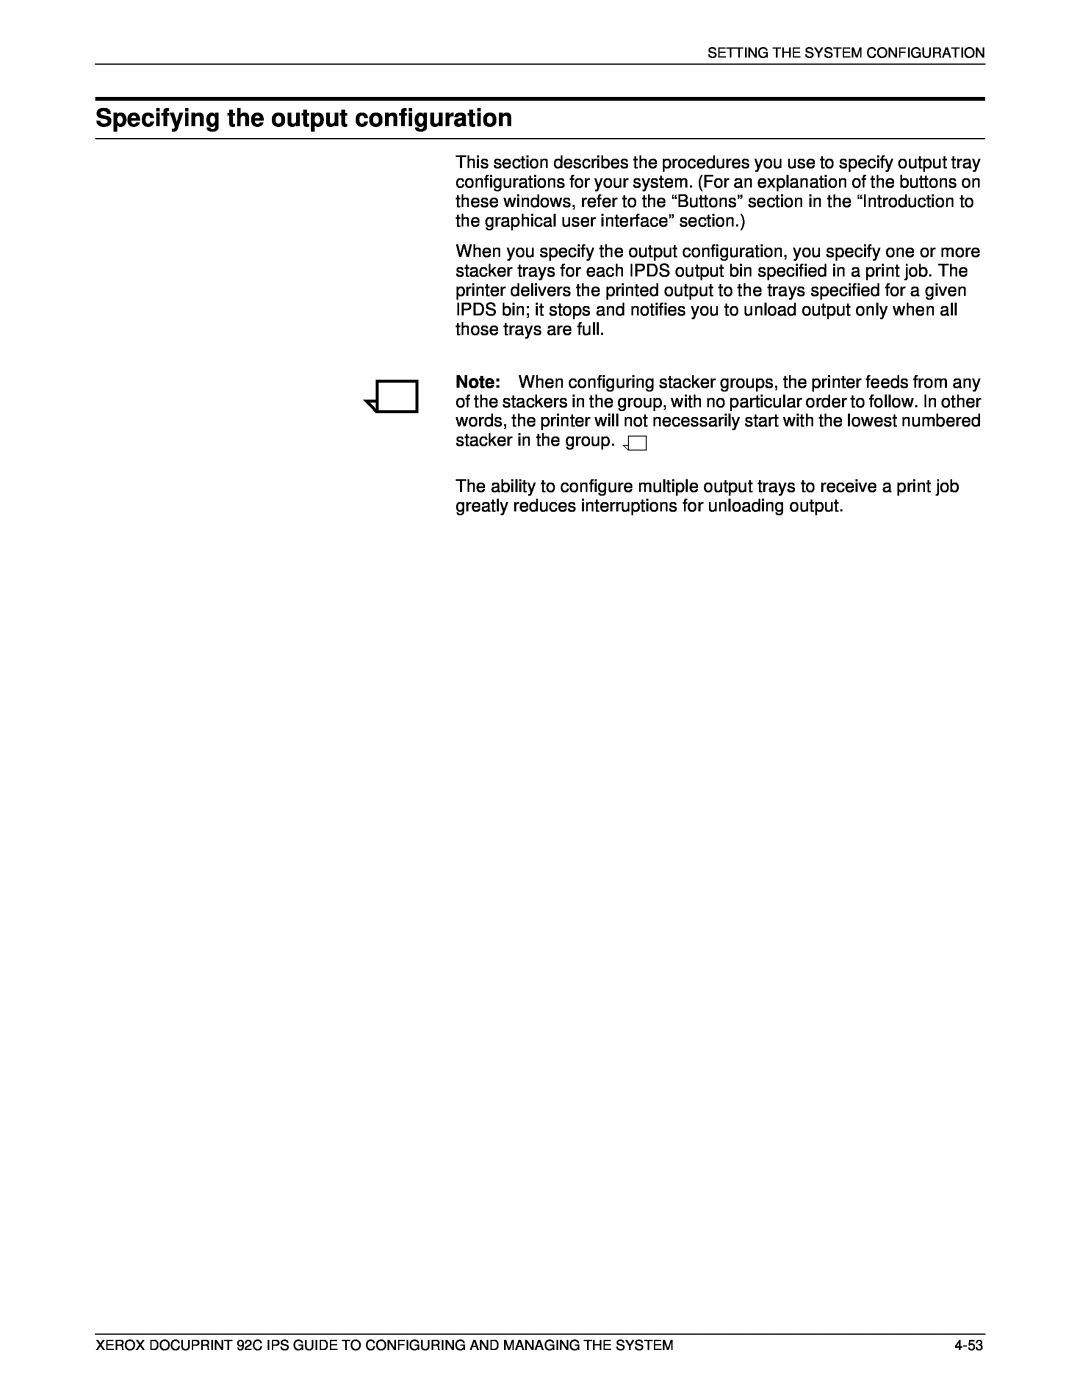 Xerox 92C IPS manual Specifying the output configuration 